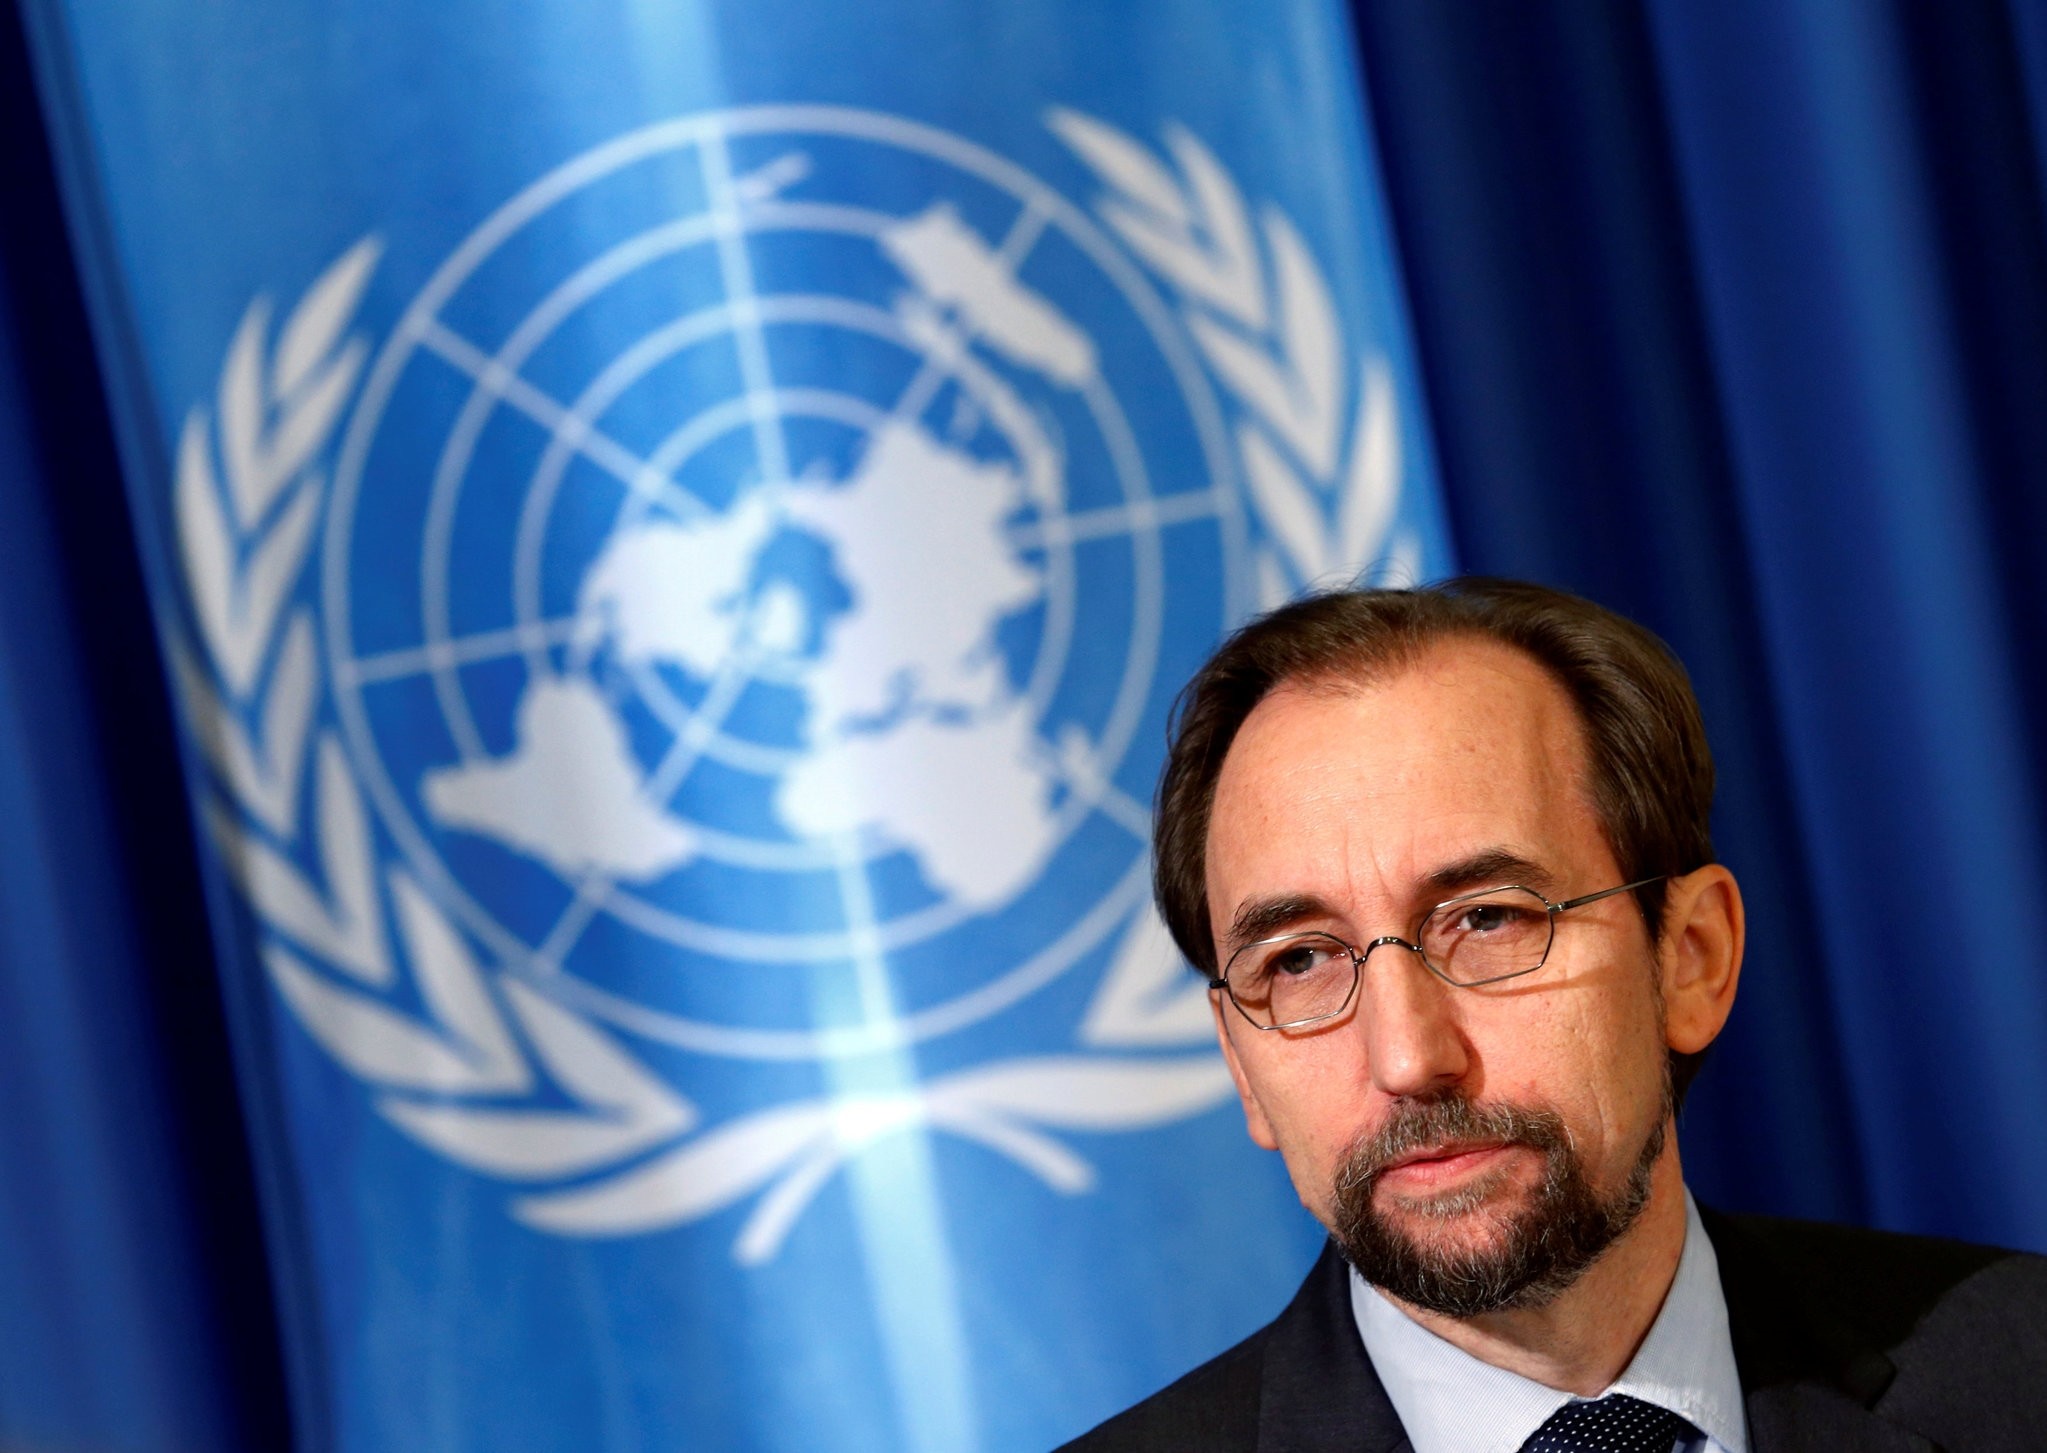 United Nations High Commissioner for Human Rights Zeid Ra'ad Al Hussein attends a media briefing at the U.N. European headquarters in Geneva, Switzerland October 12, 2016. (REUTERS Photo)